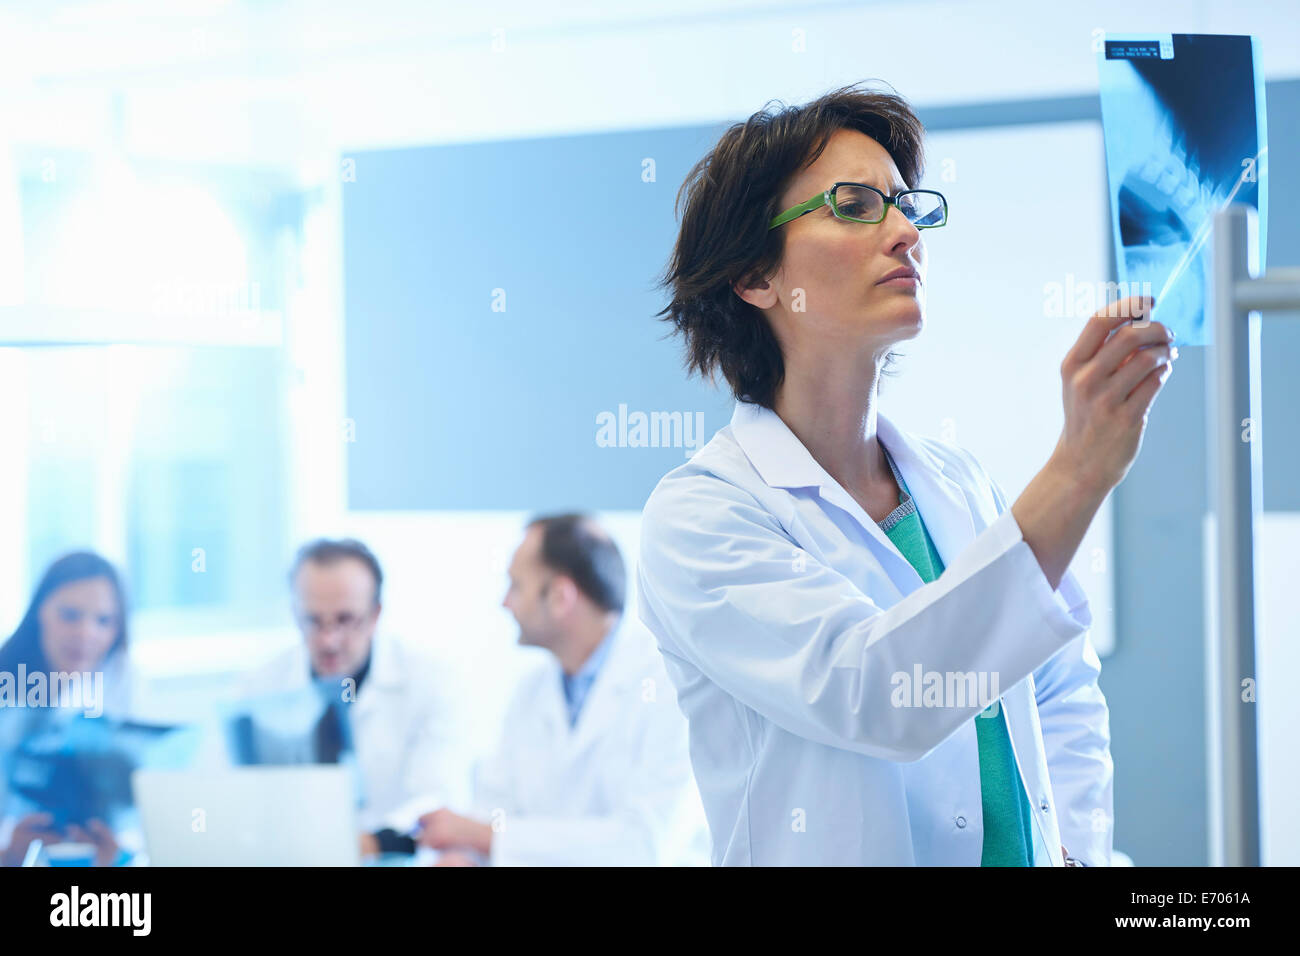 Female doctor looking at x-ray Stock Photo